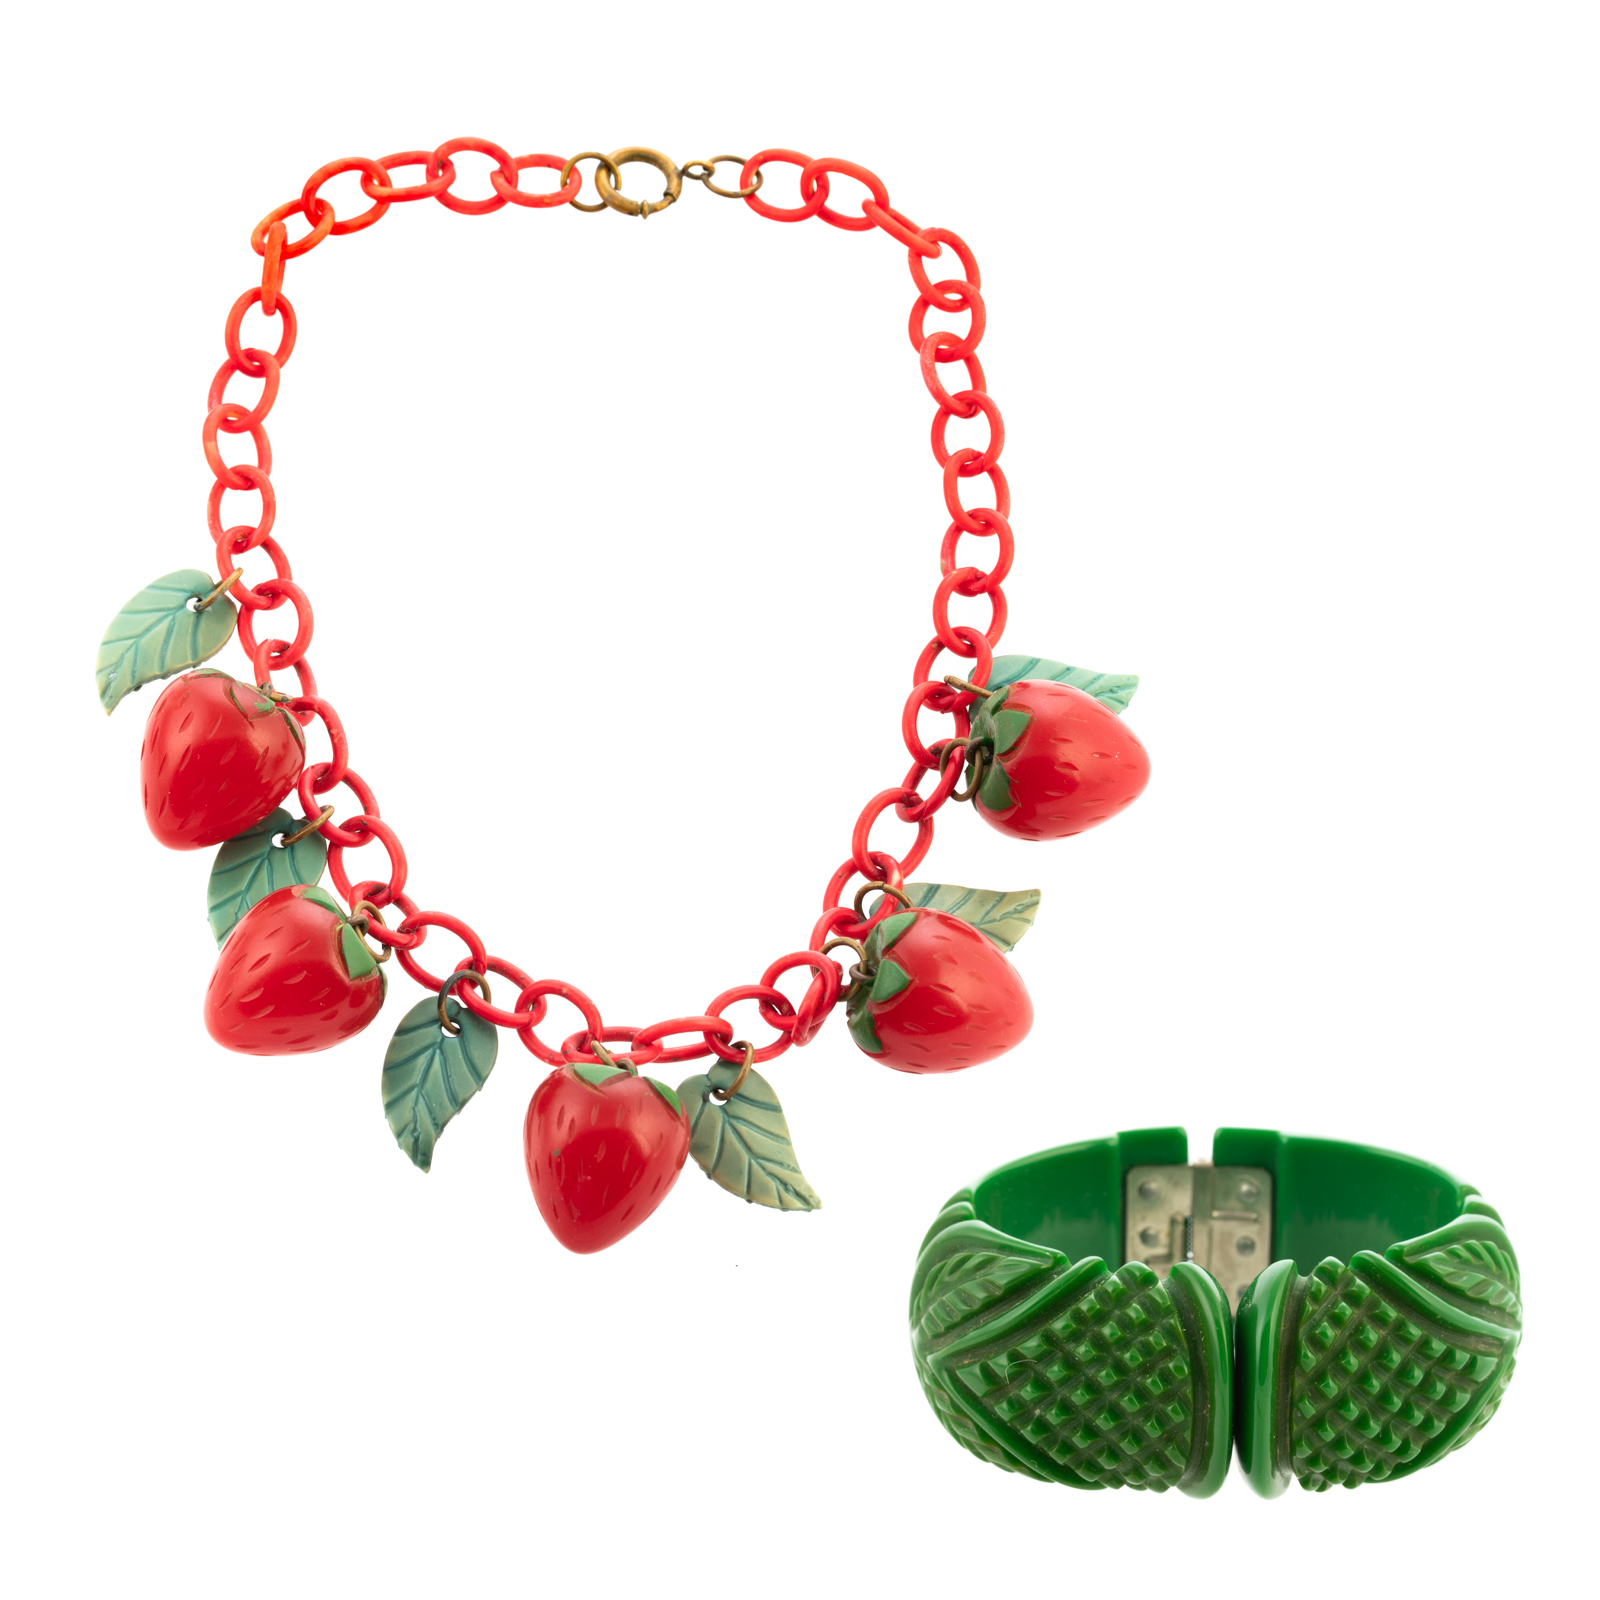 A BAKELITE STRAWBERRY NECKLACE & CARVED